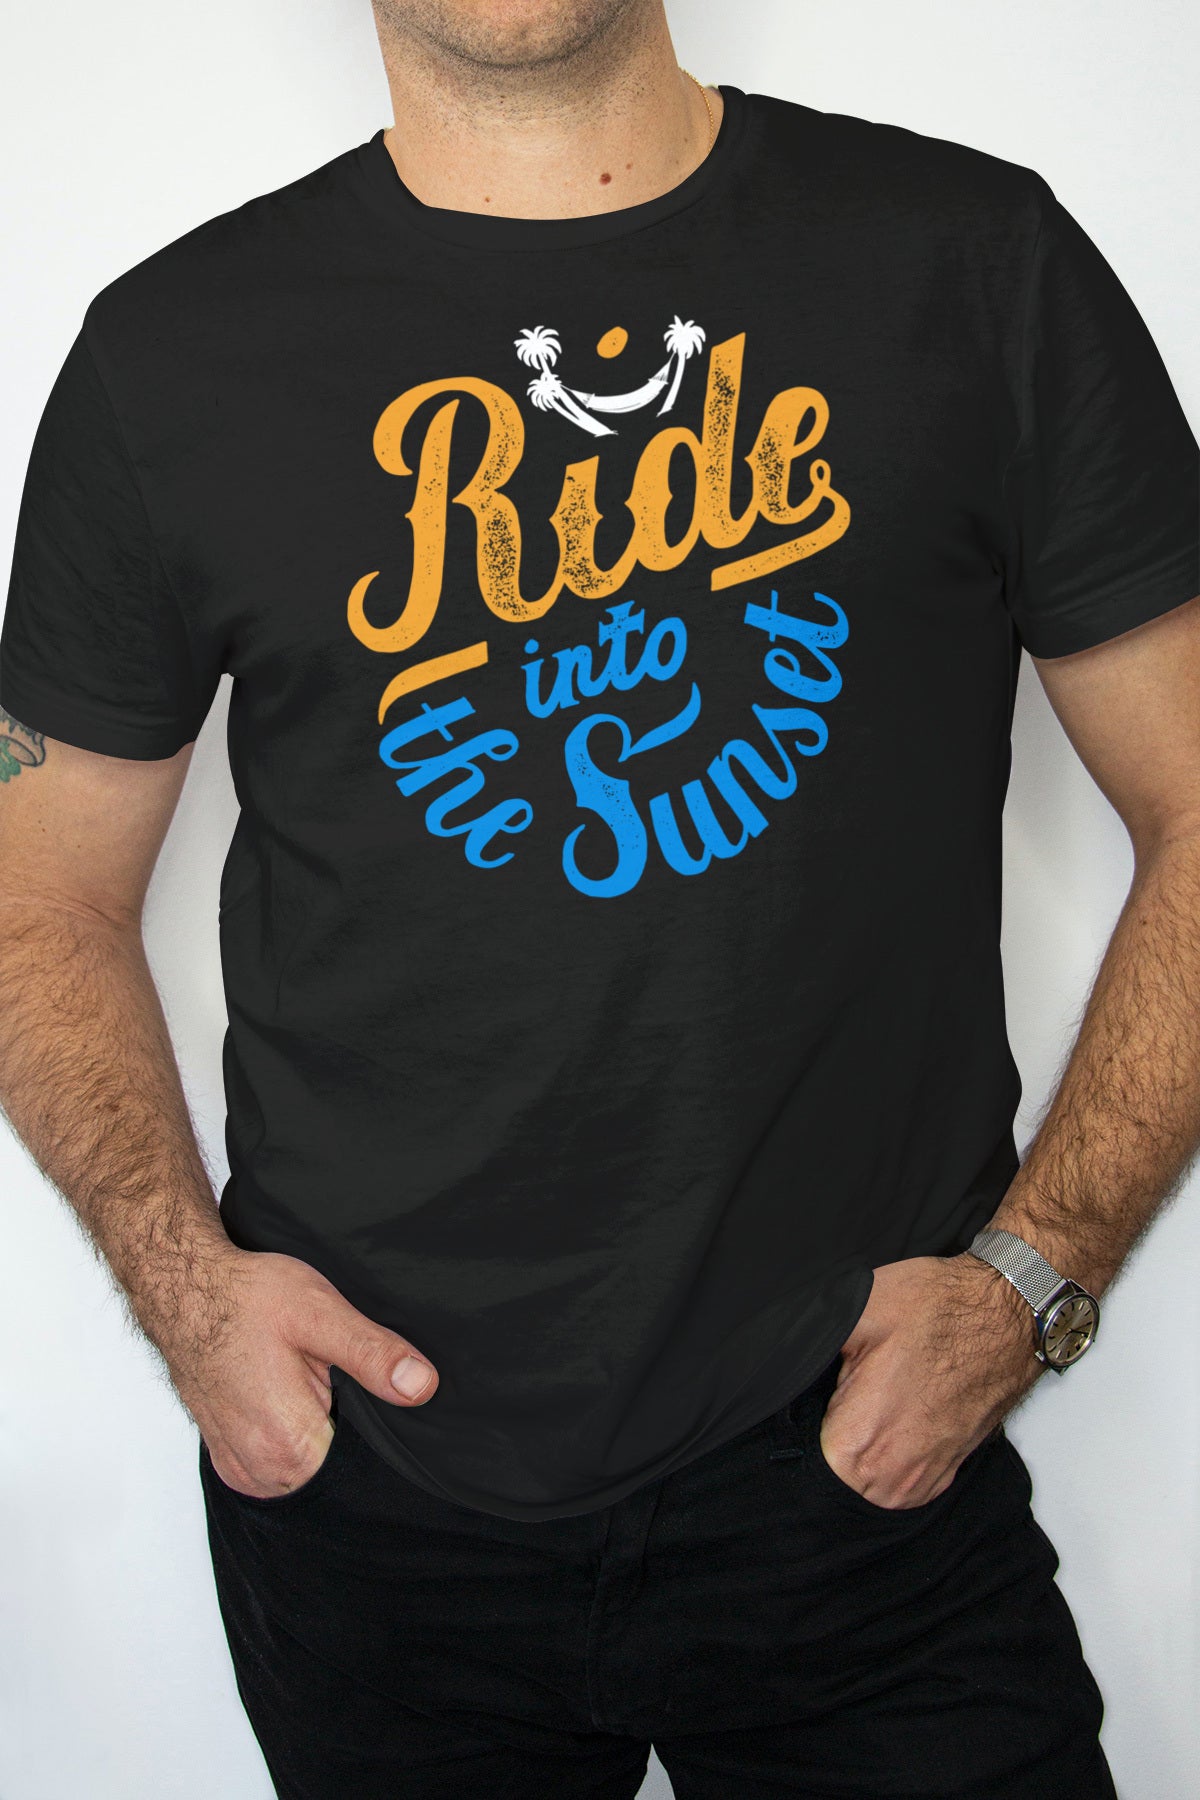 On a sunny day, a man is seen wearing a black Ride Into the Sunshine T-Shirt.